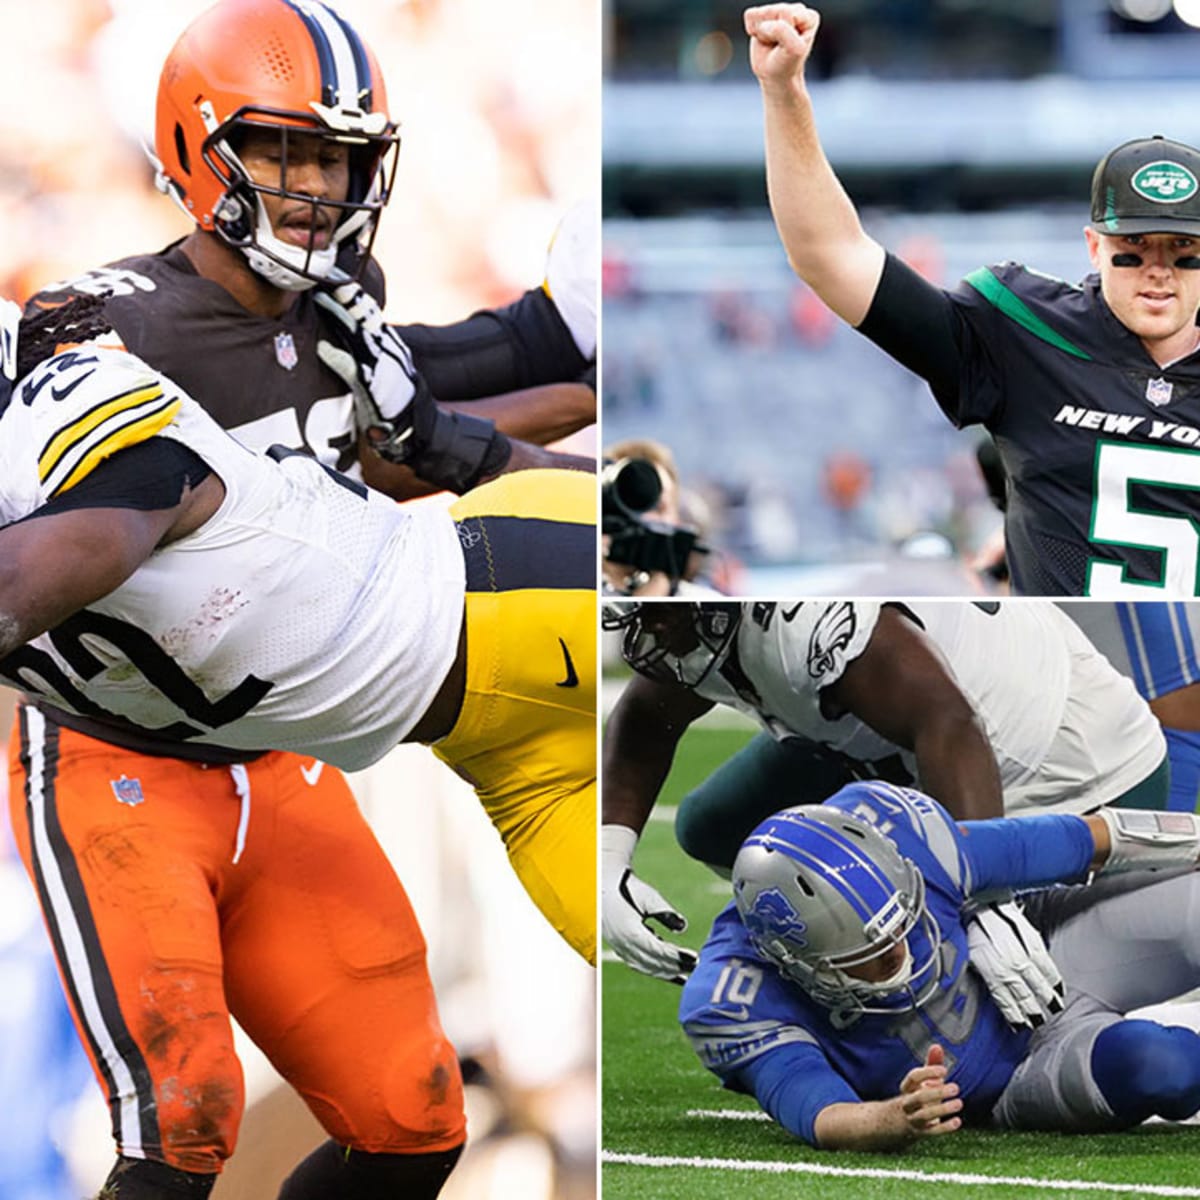 Week 8 Takeaways Feisty divisional games, blowouts, a wide open AFC and the Mike White show on a Halloween NFL Sunday